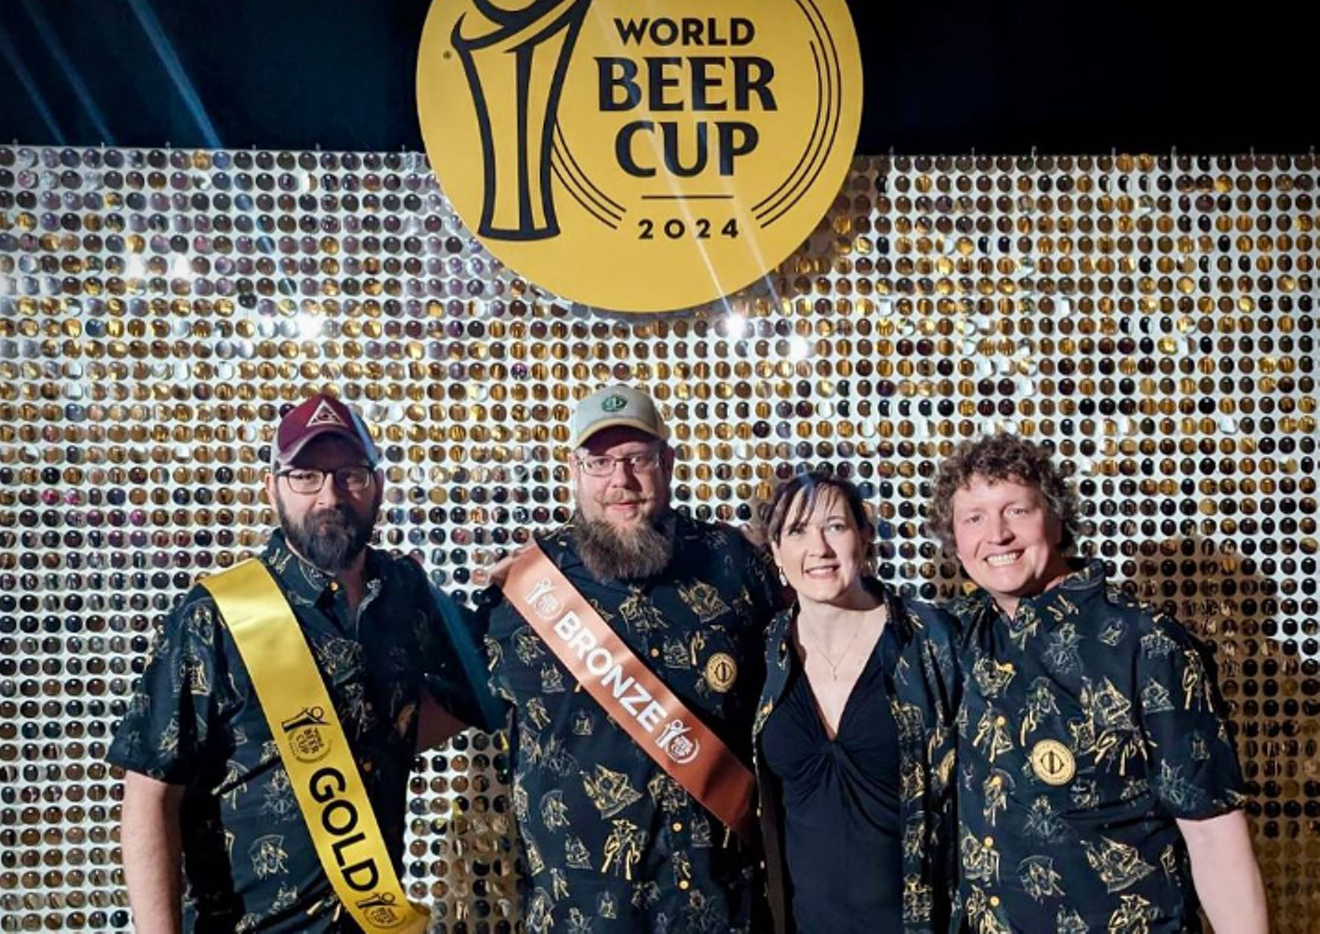 River North won gold in the coffee stout or porter category and bronze for its pumpkin beer.